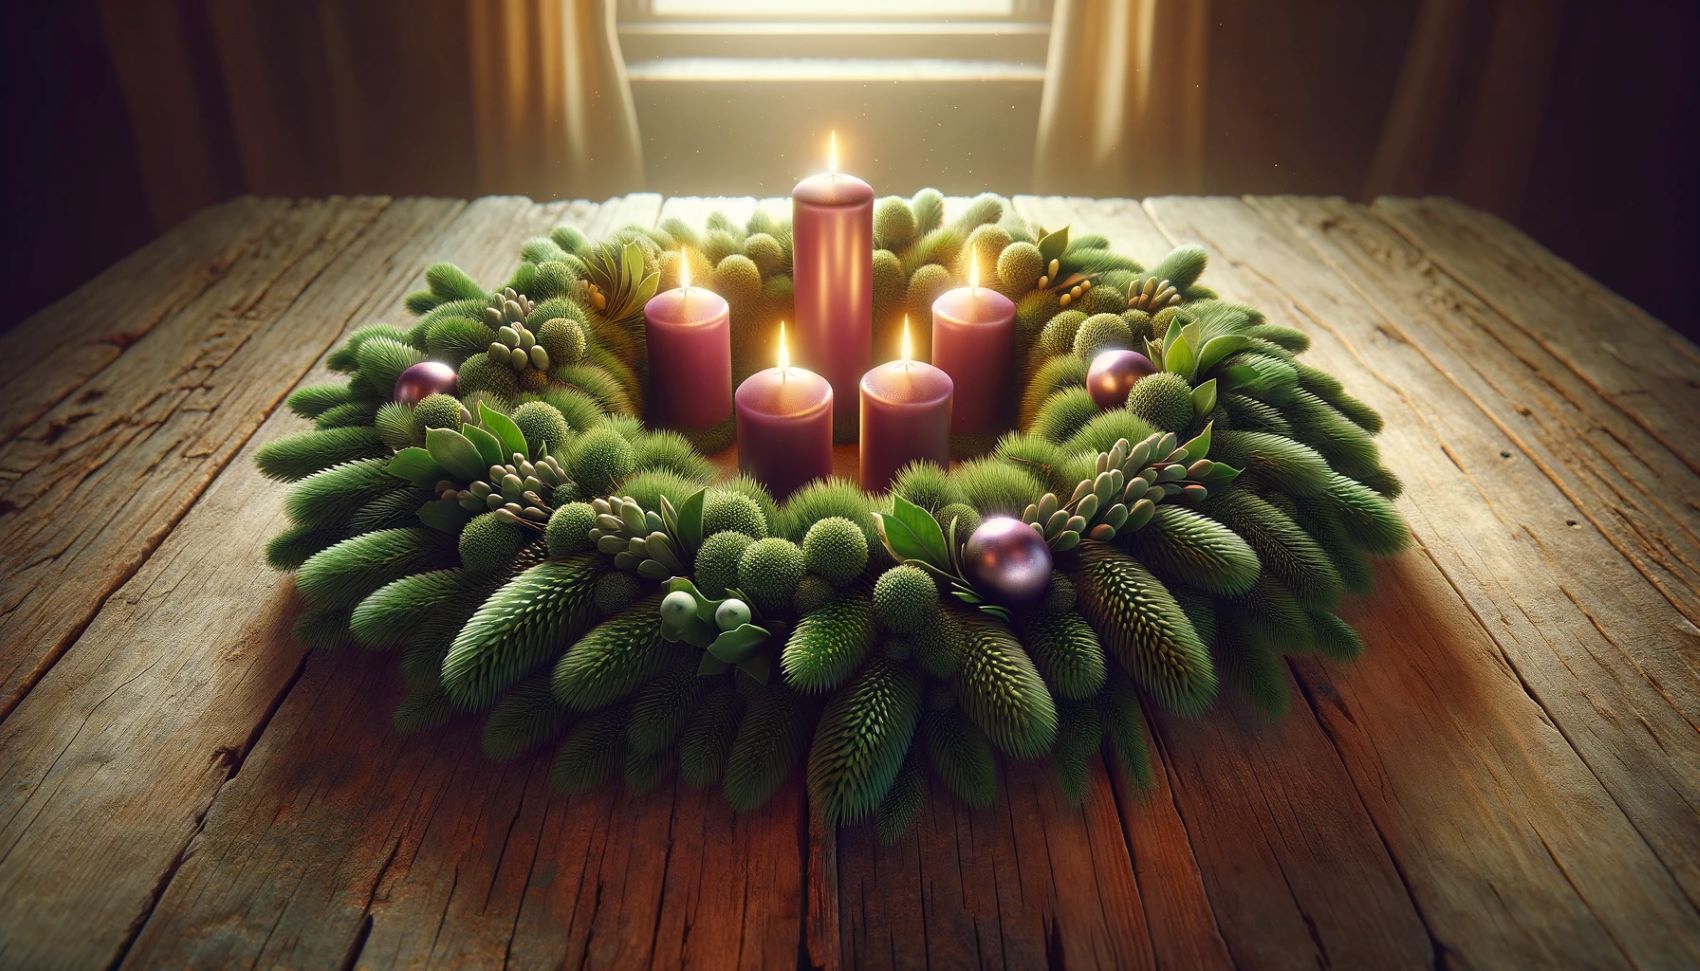 What Does The Evergreen Mean On The Advent Wreath